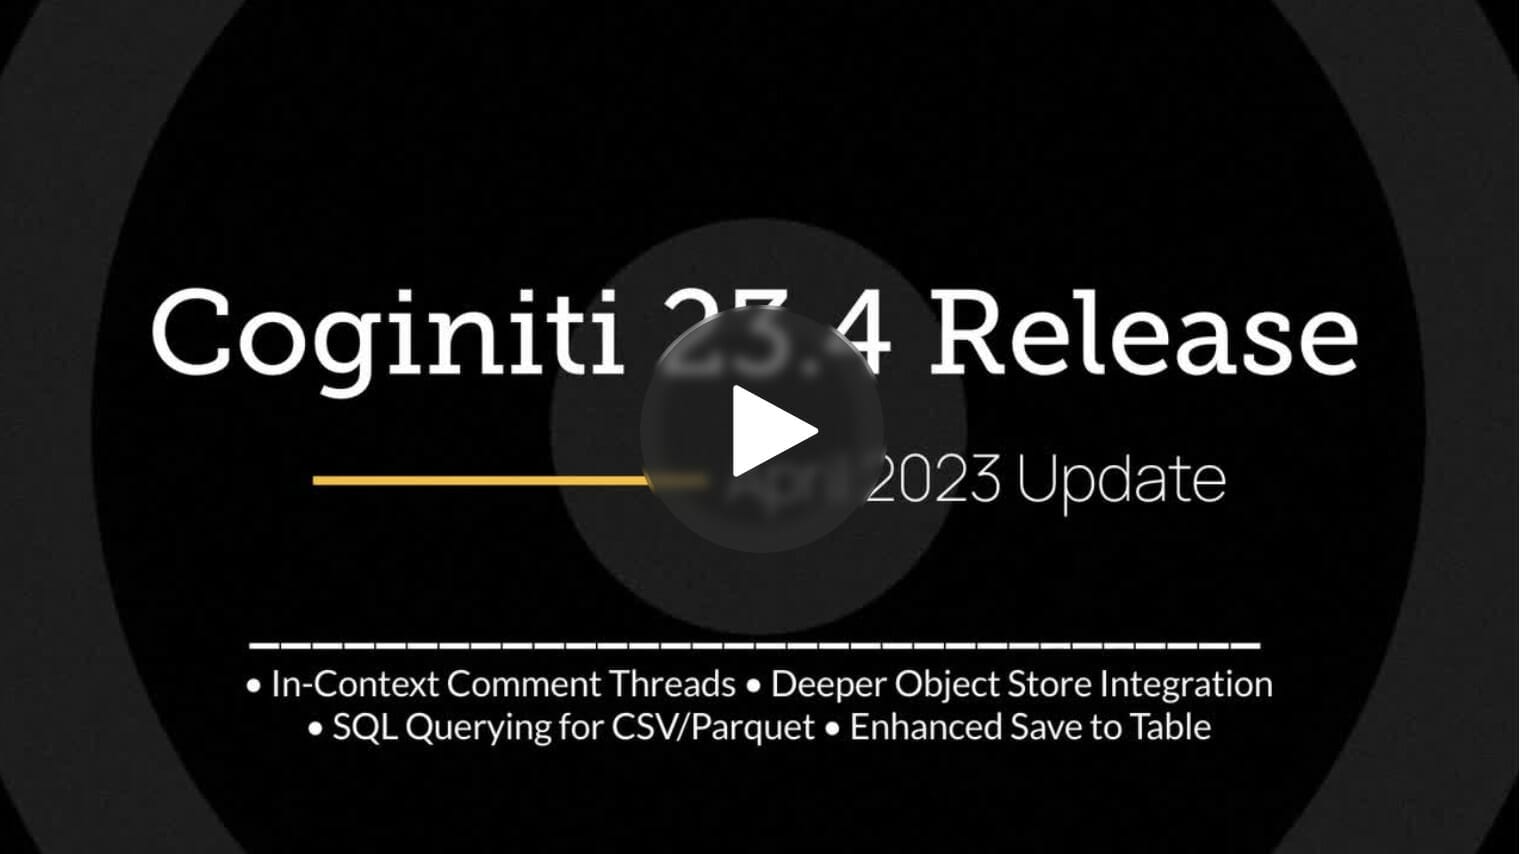 Coginiti 23.4 Release Overview